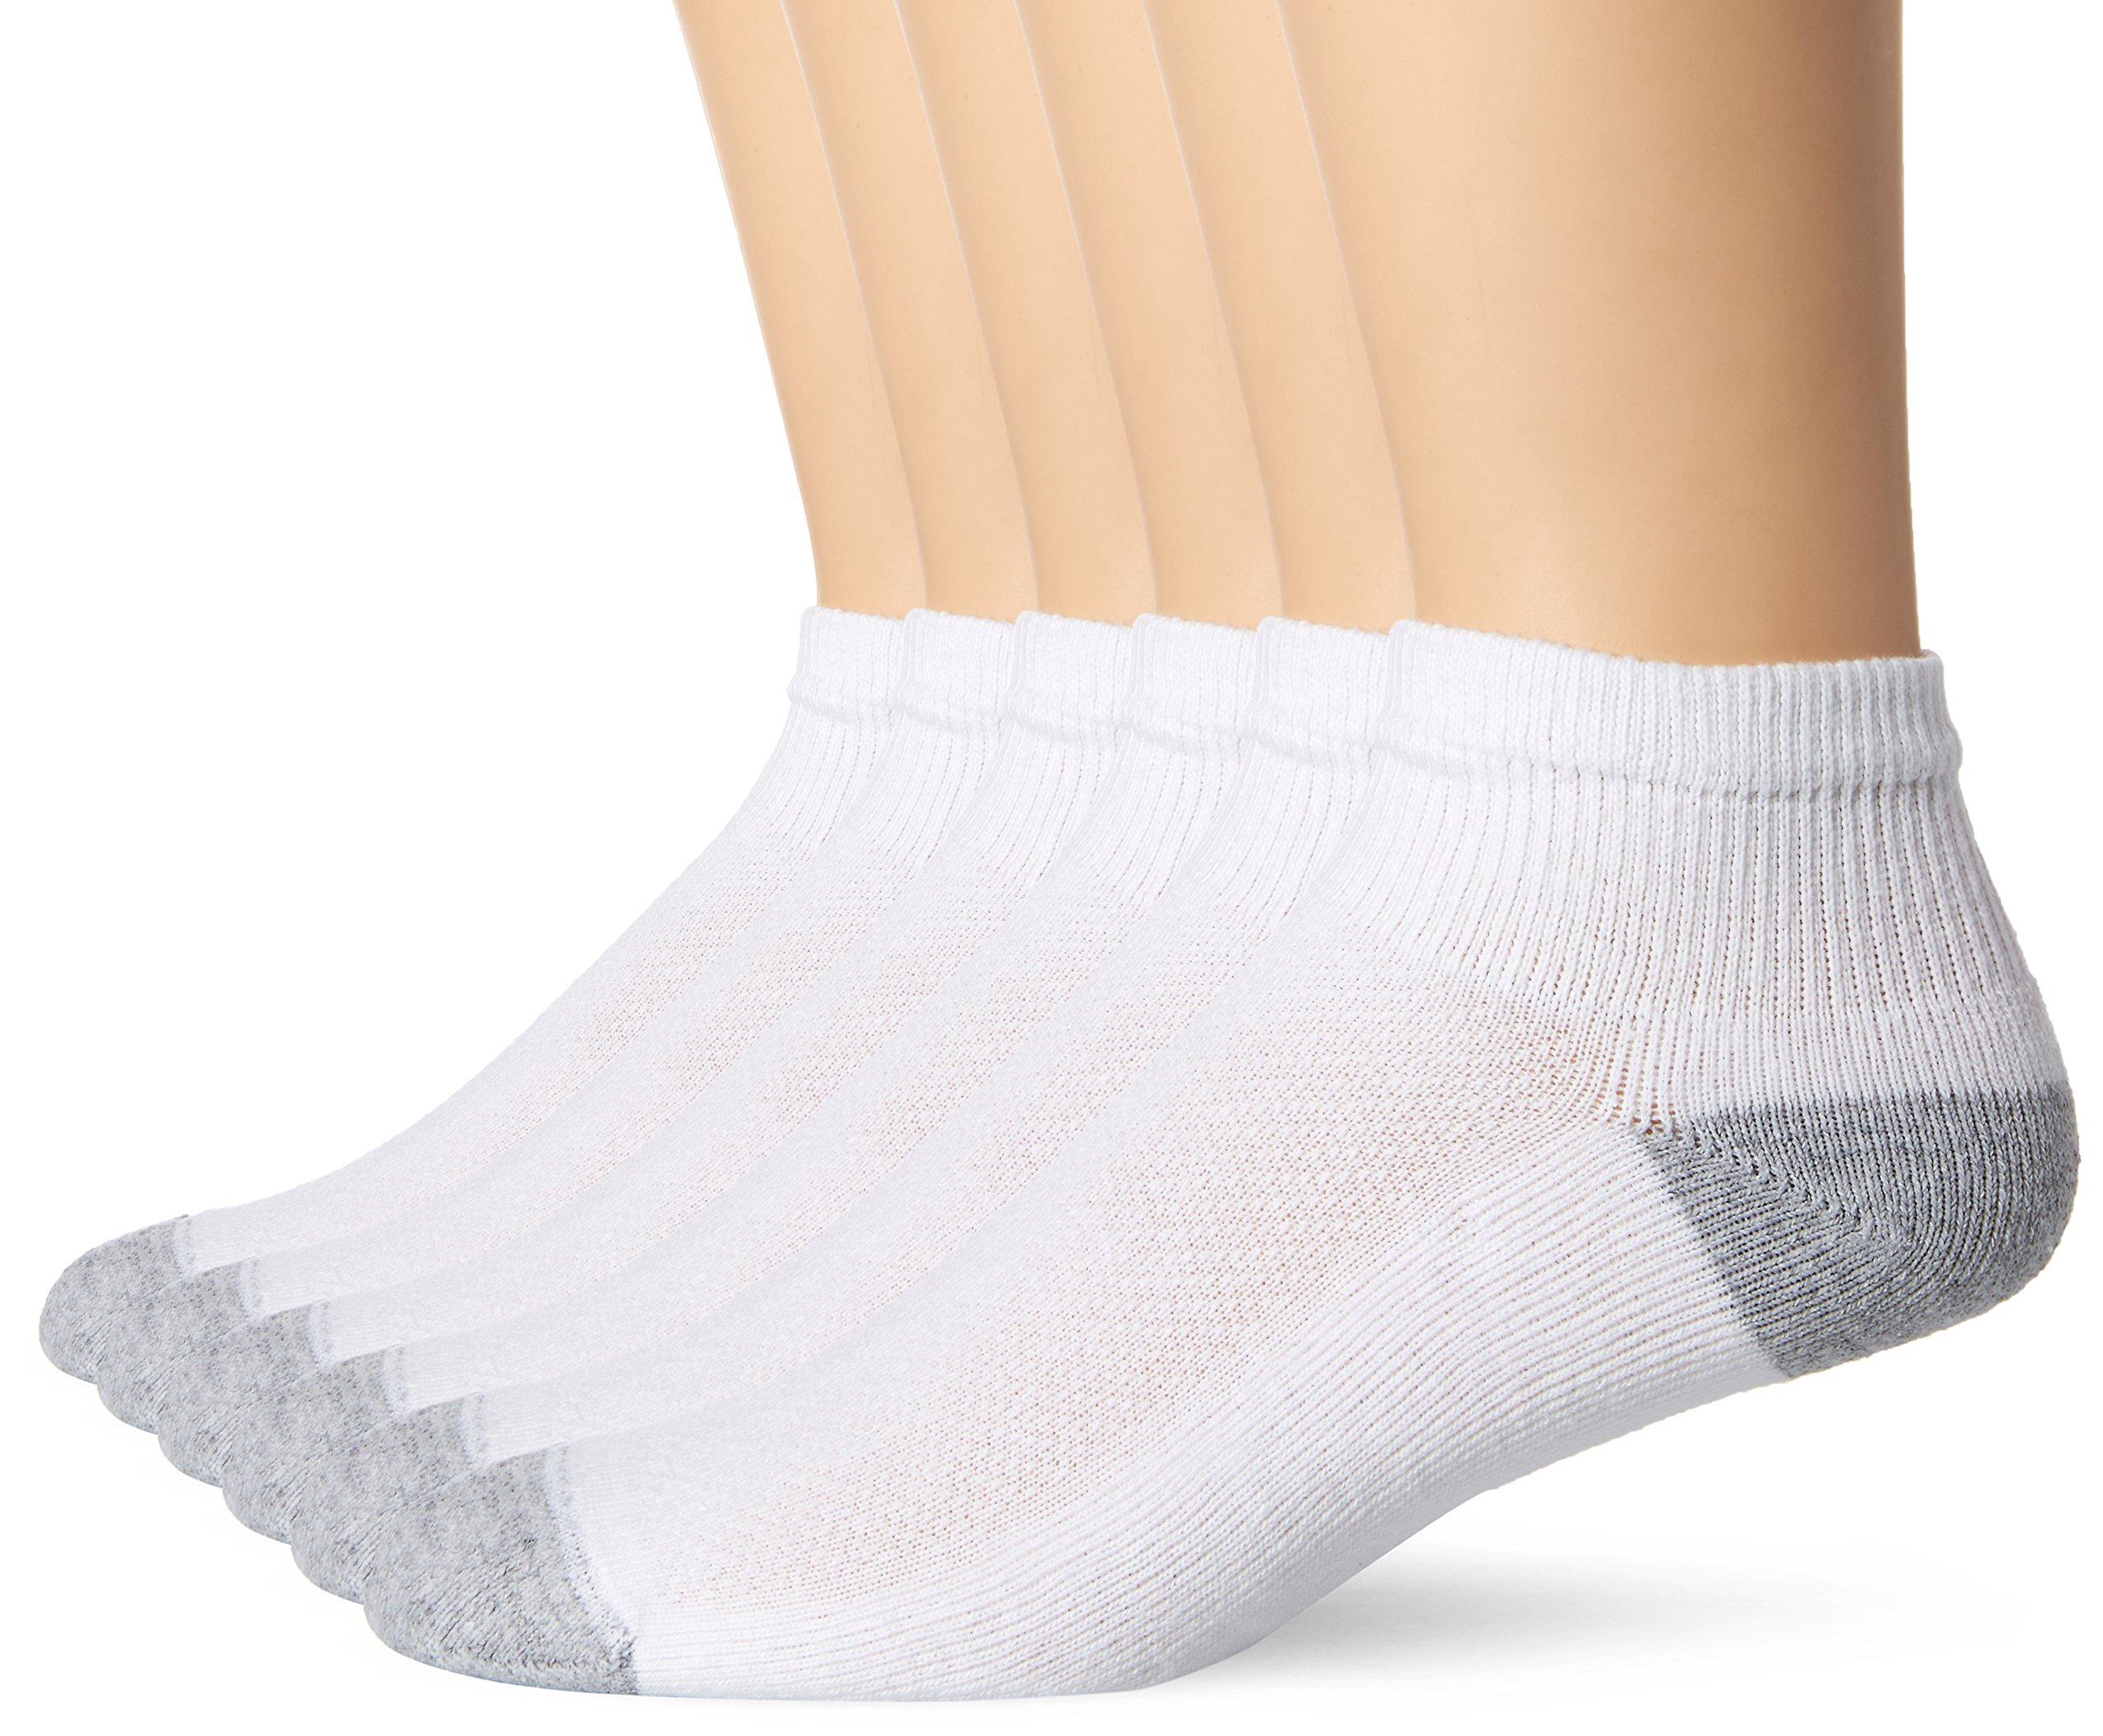 Hanes Cotton Freshiq X-temp Comfort Cool Ankle Socks in White/Grey ...